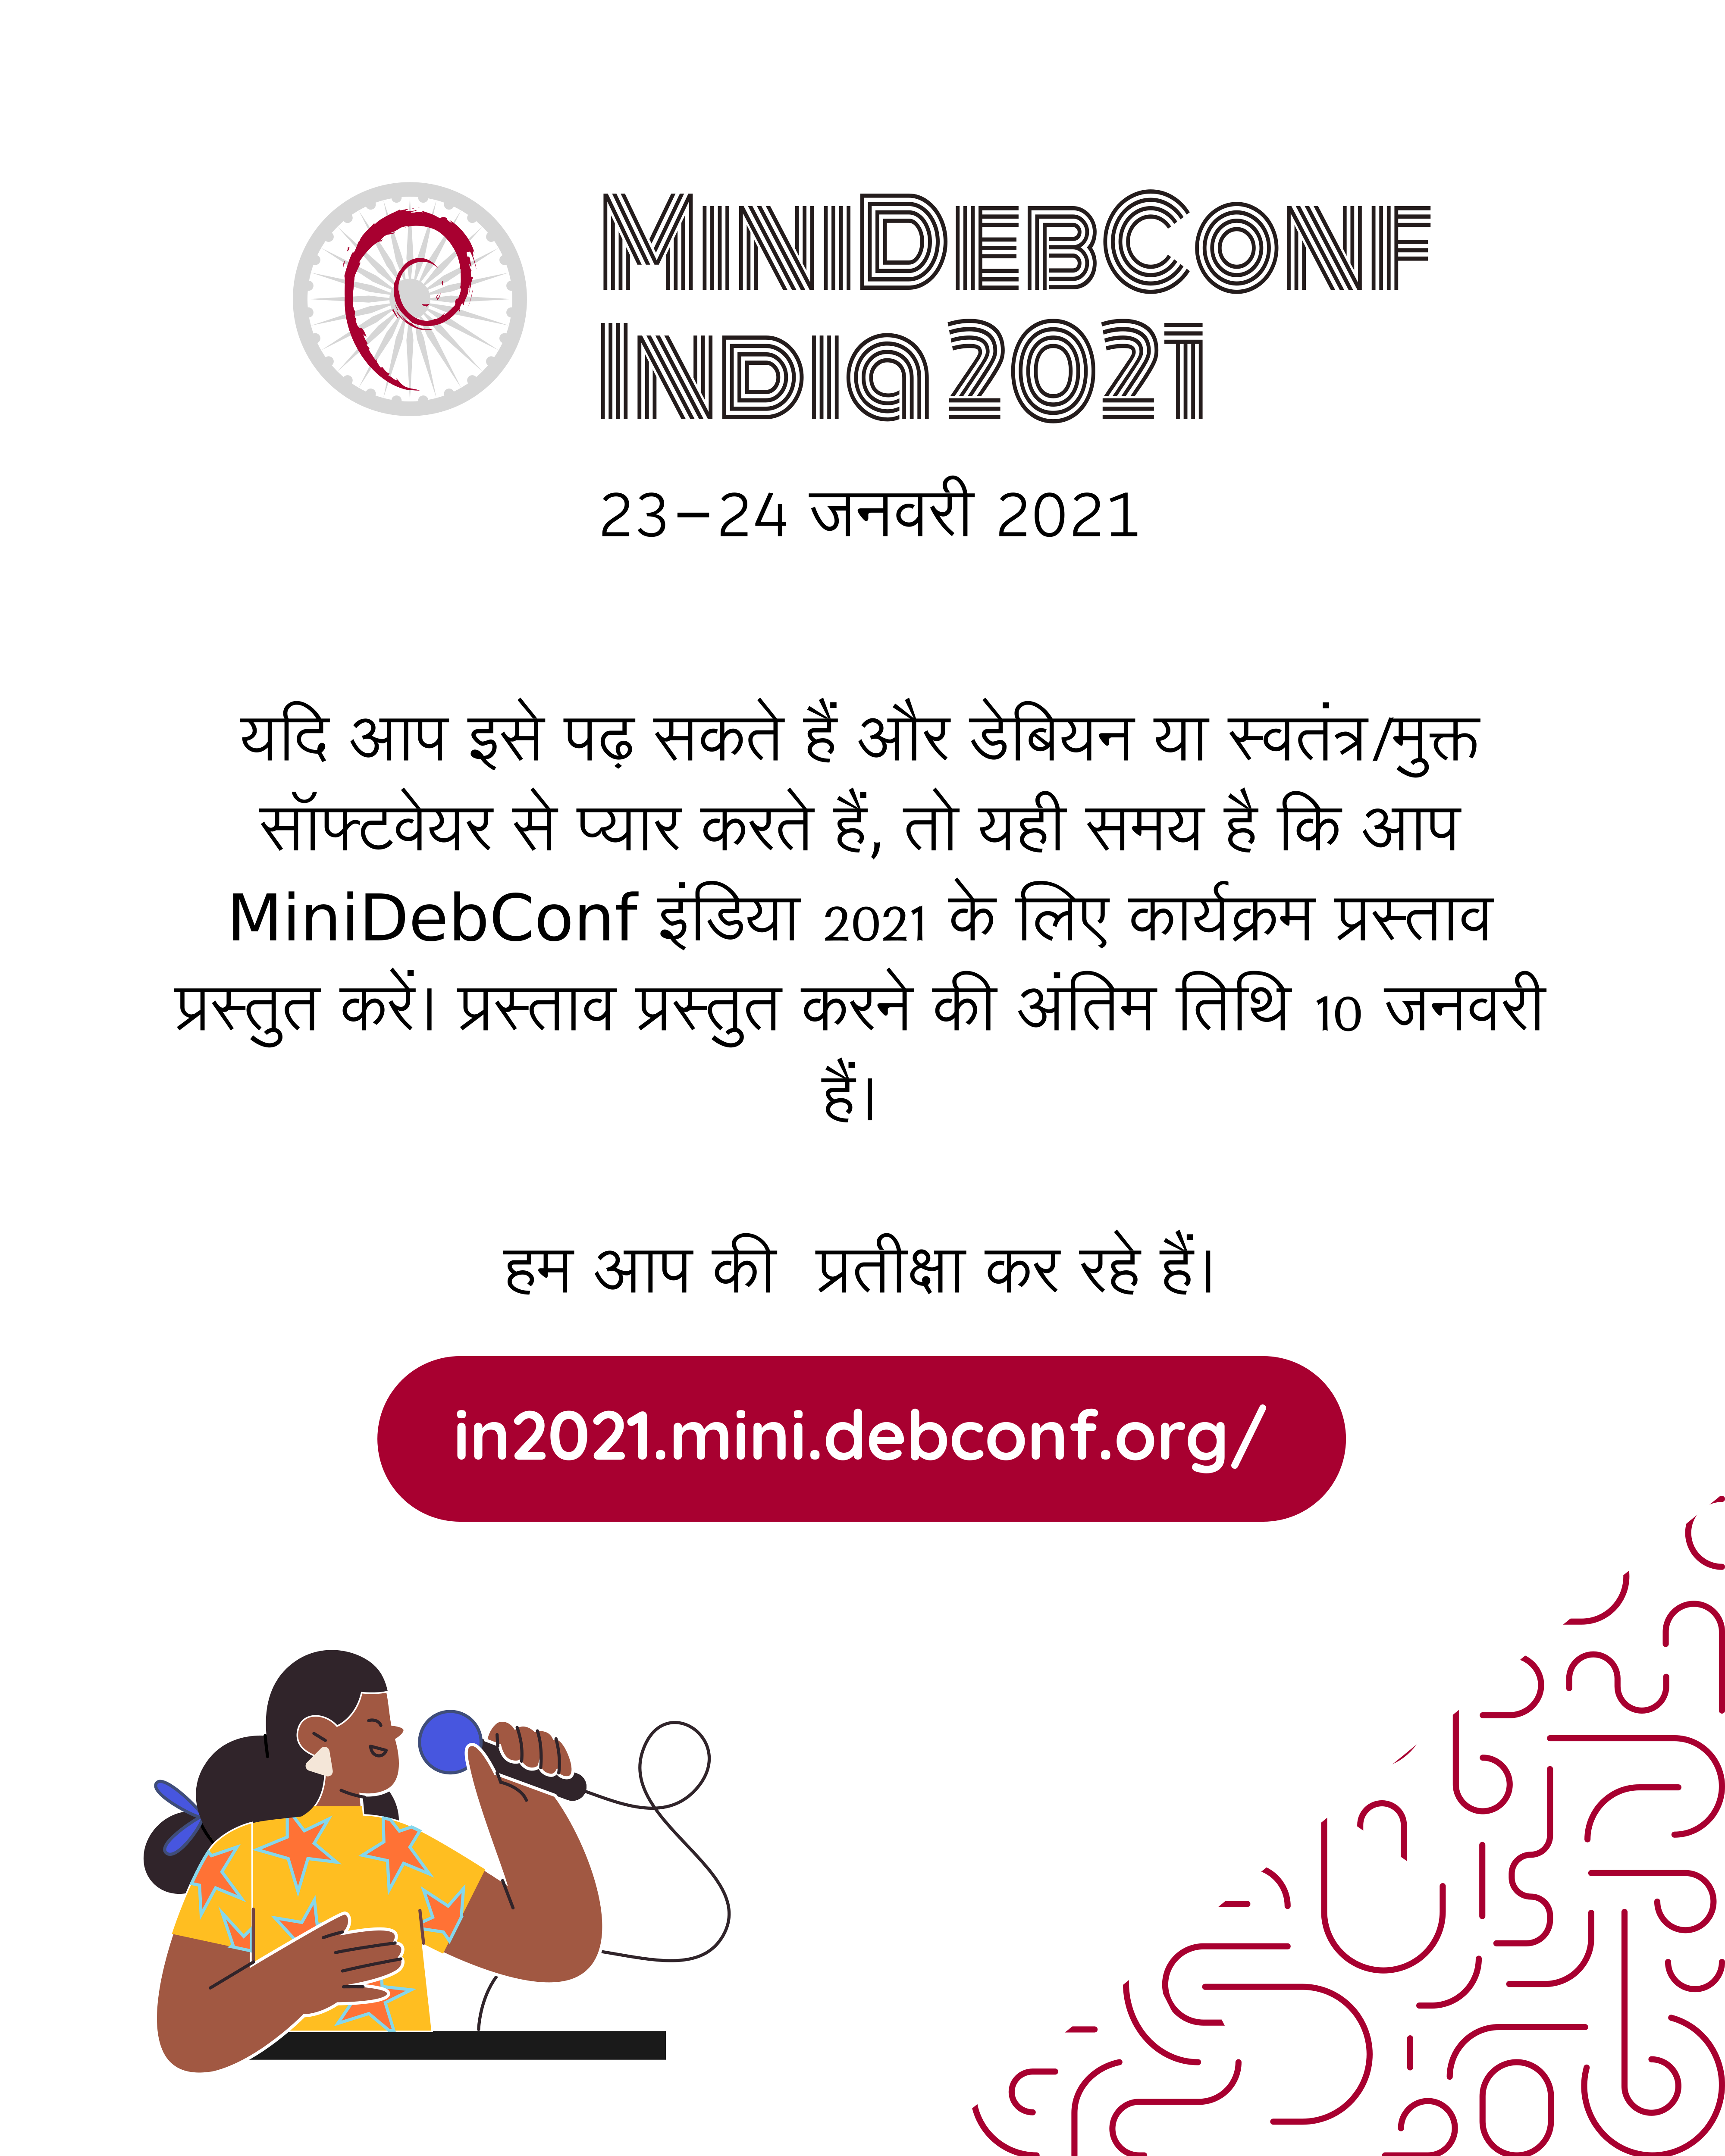 MiniDebConf India 2021 call for proposal poster in hindi language.